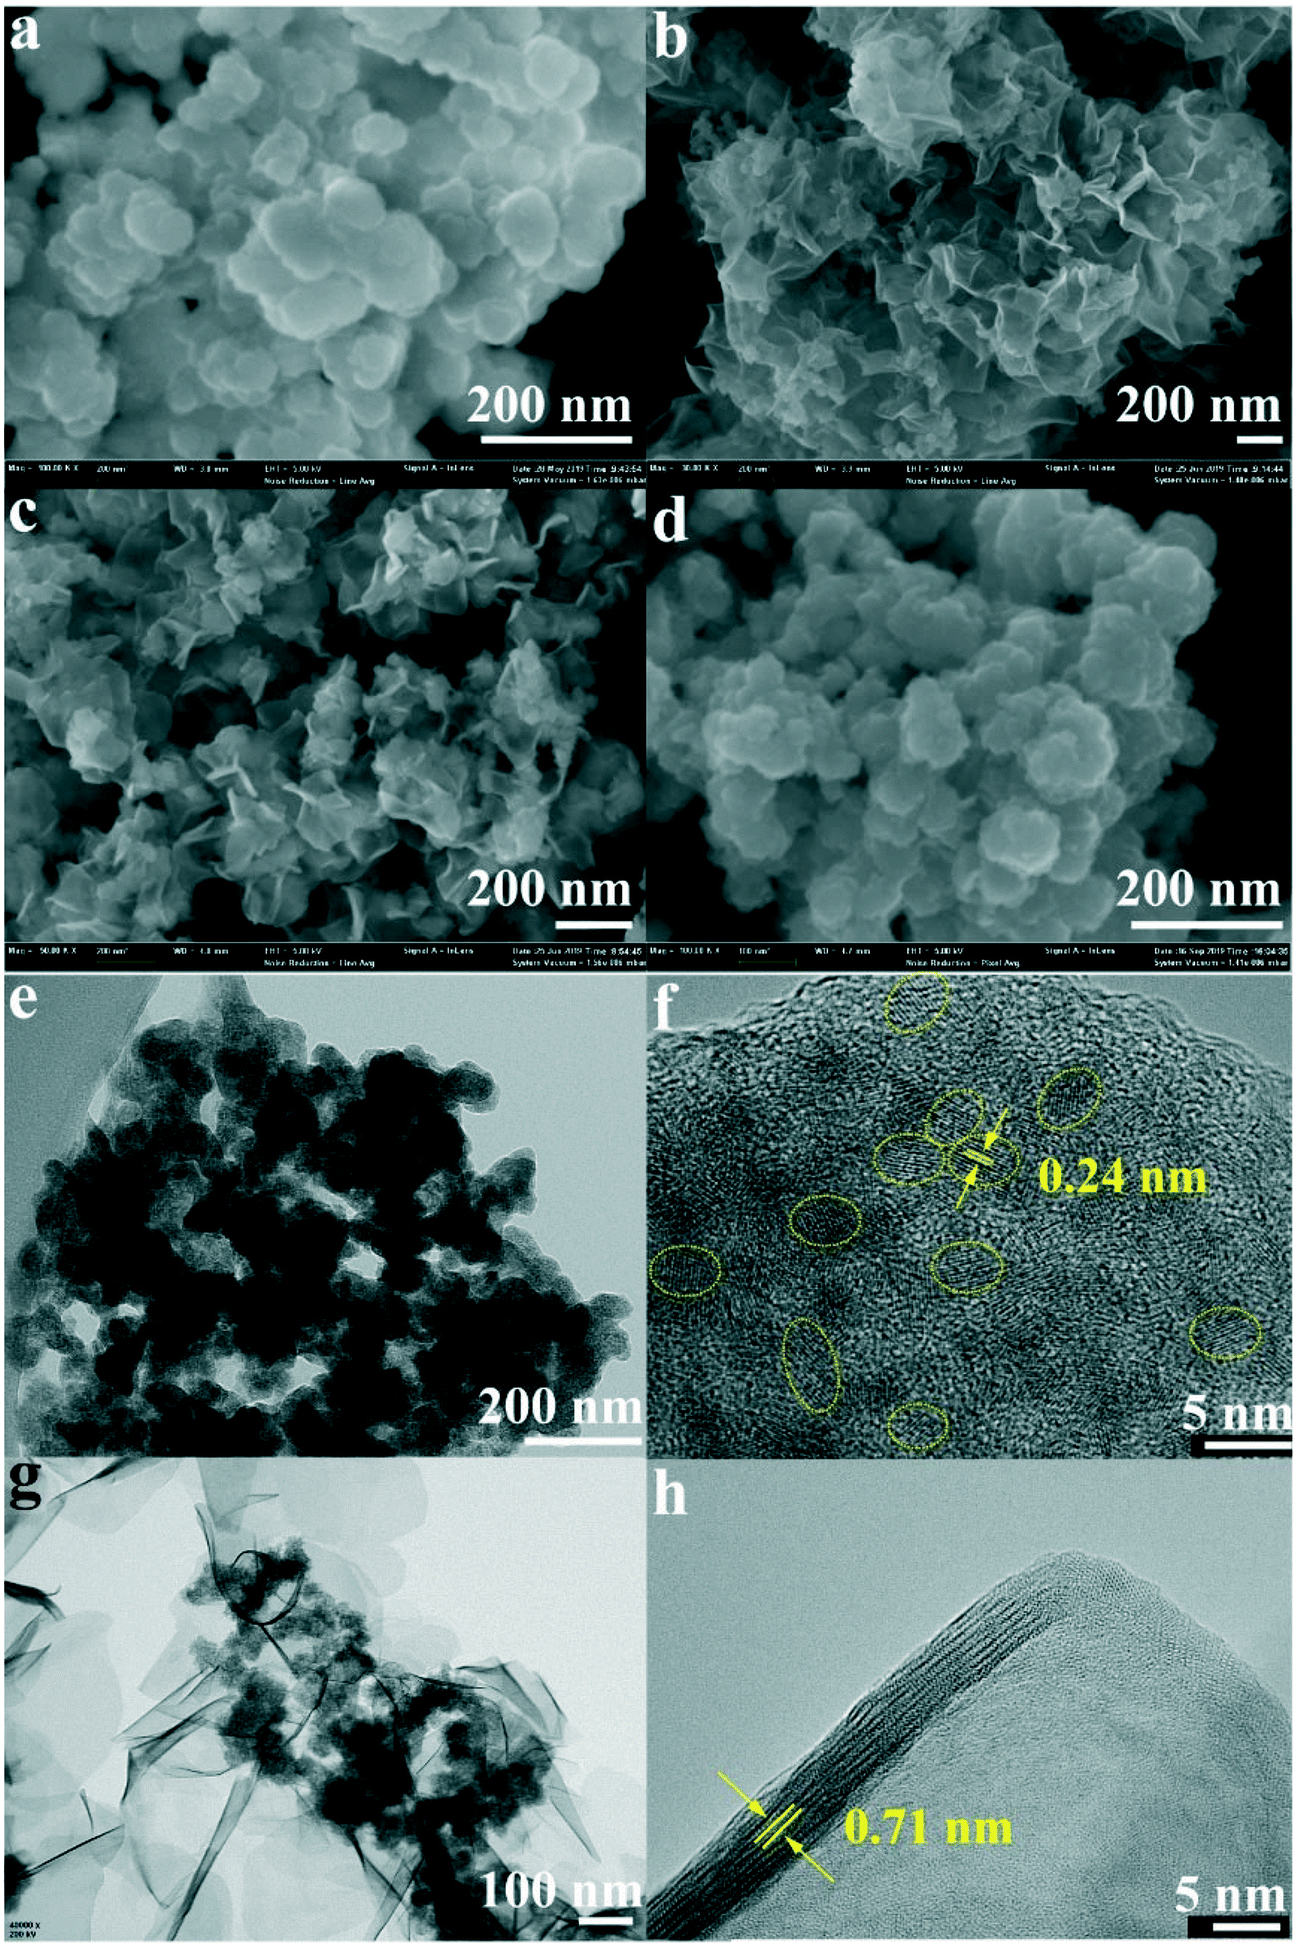 Regulating Oxygen Vacancies In Ultrathin D Mno 2 Nanosheets With Superior Activity For Gaseous Ozone Decomposition Environmental Science Nano Rsc Publishing Doi 10 1039 D1enc